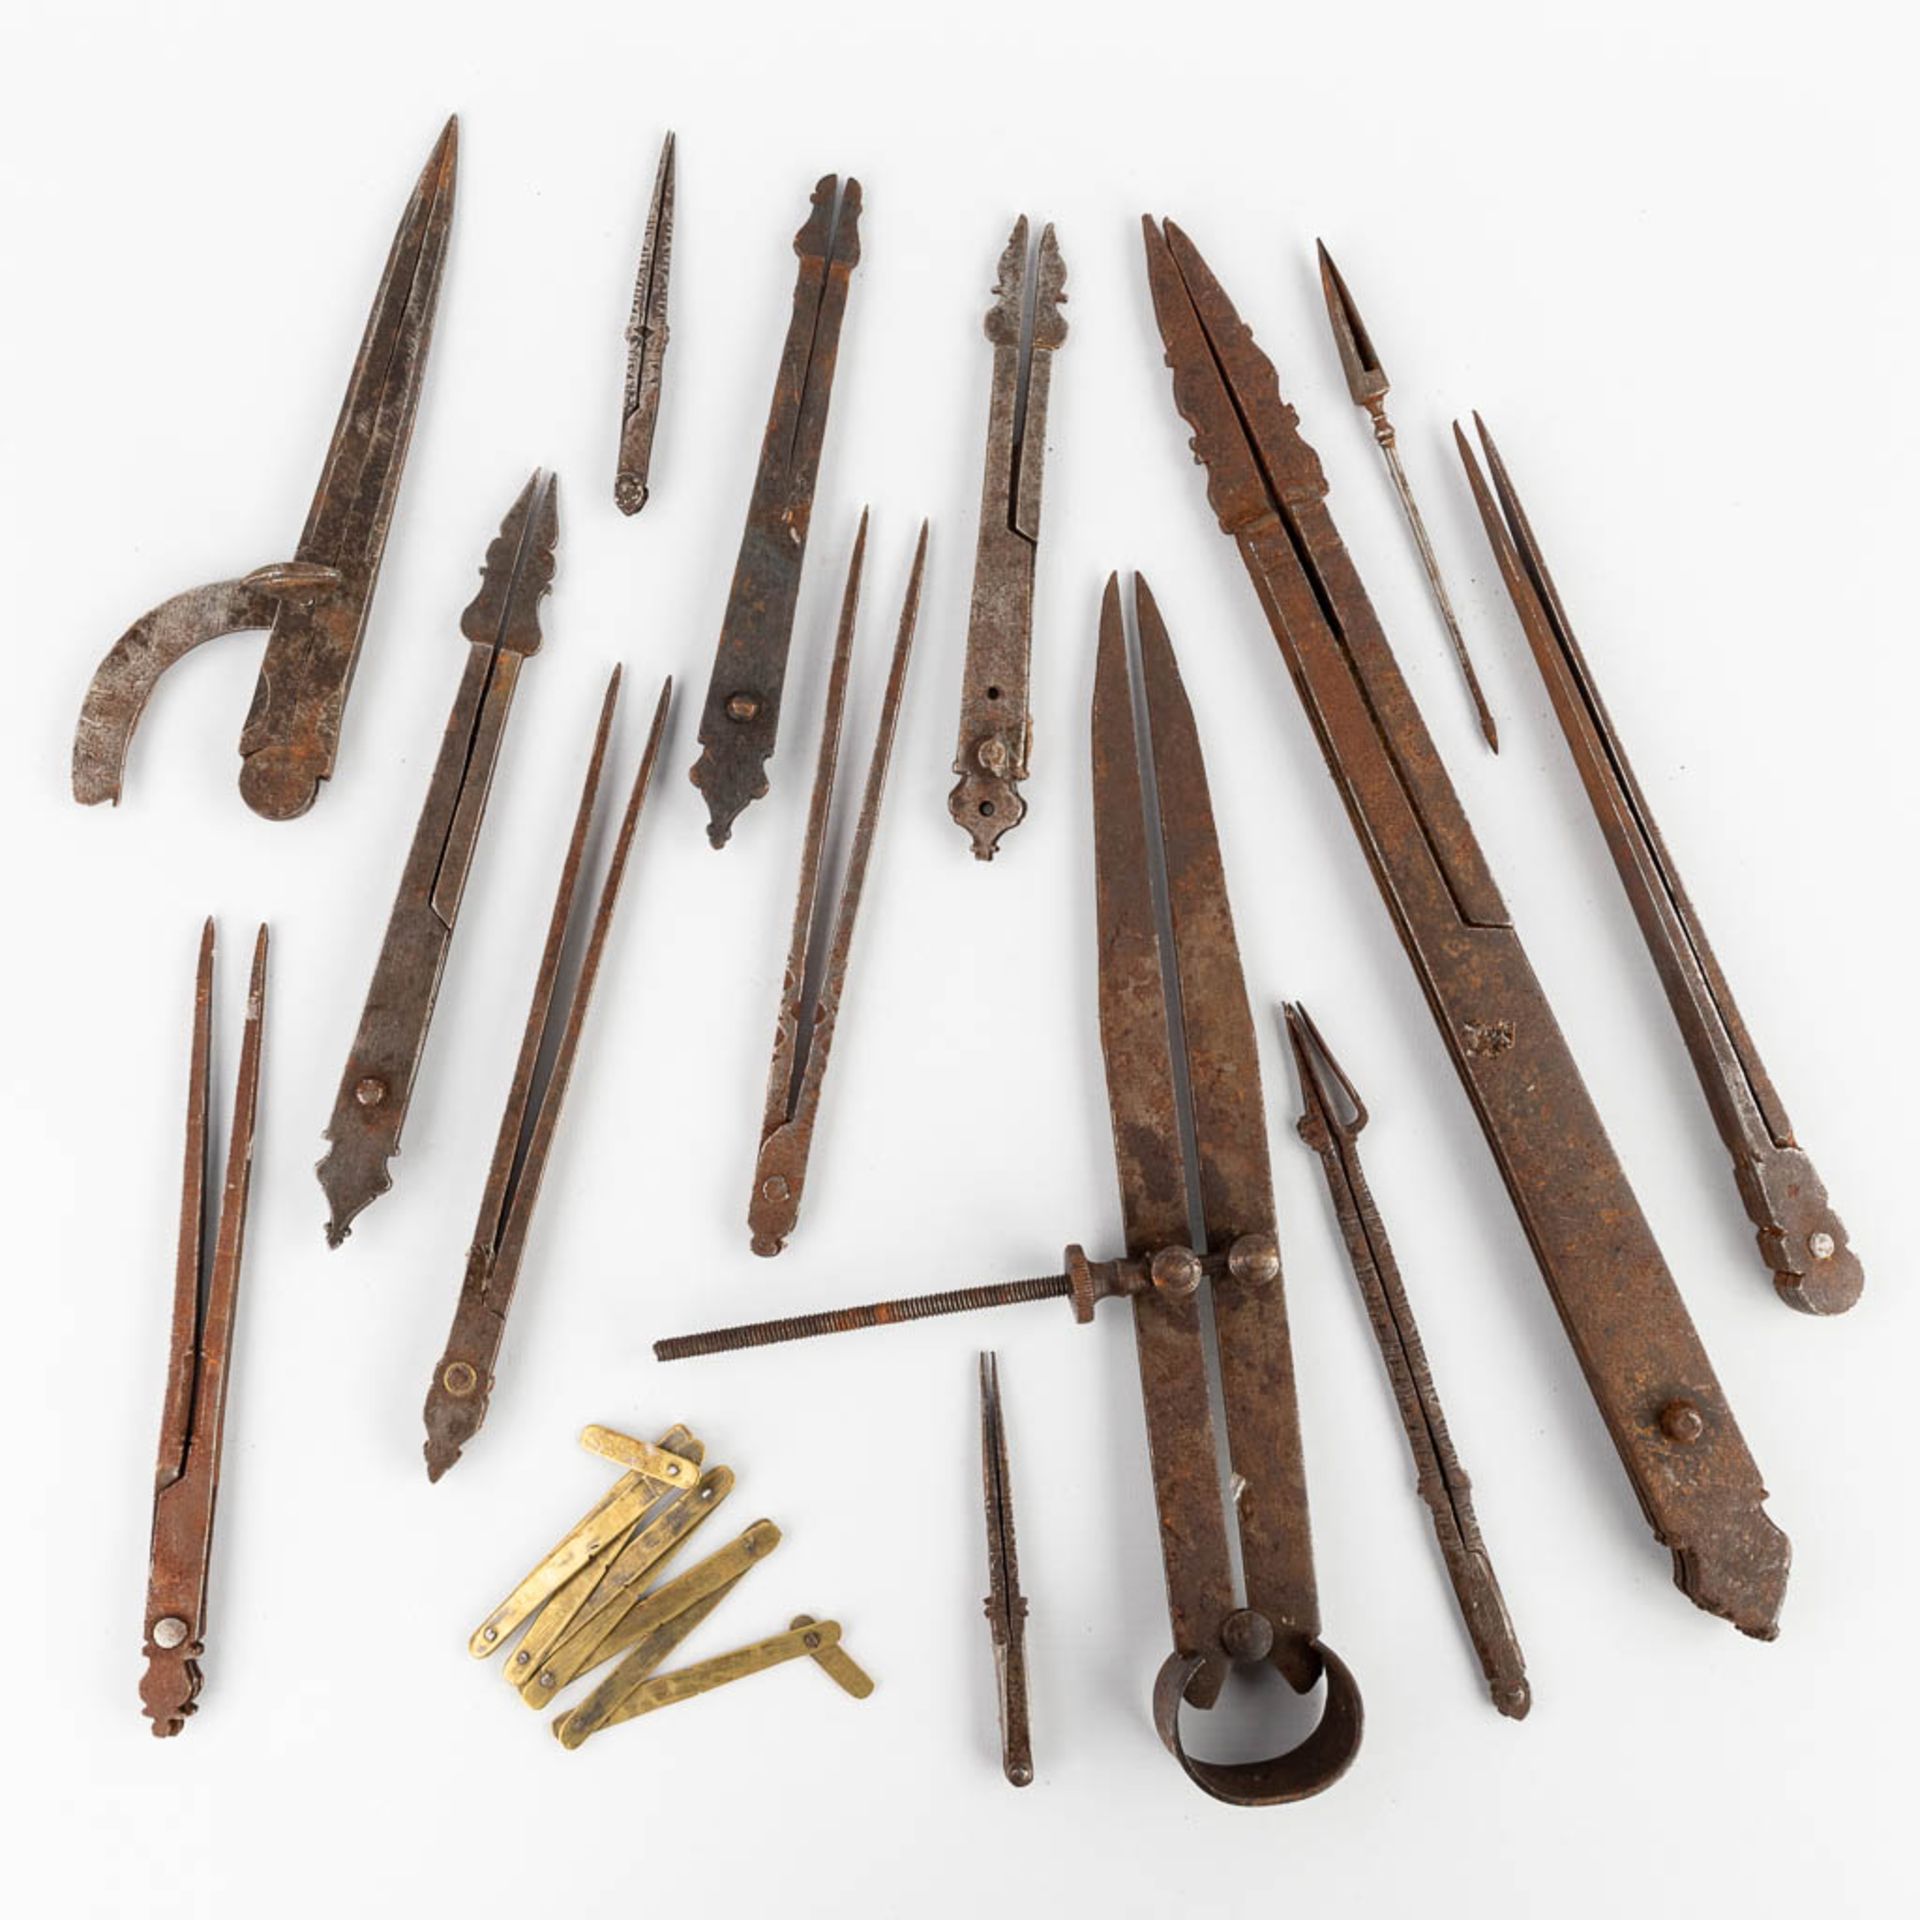 A large collection of 14 Ottoman steel measuring and marking devices and astronomy, Islamic arts. Ot